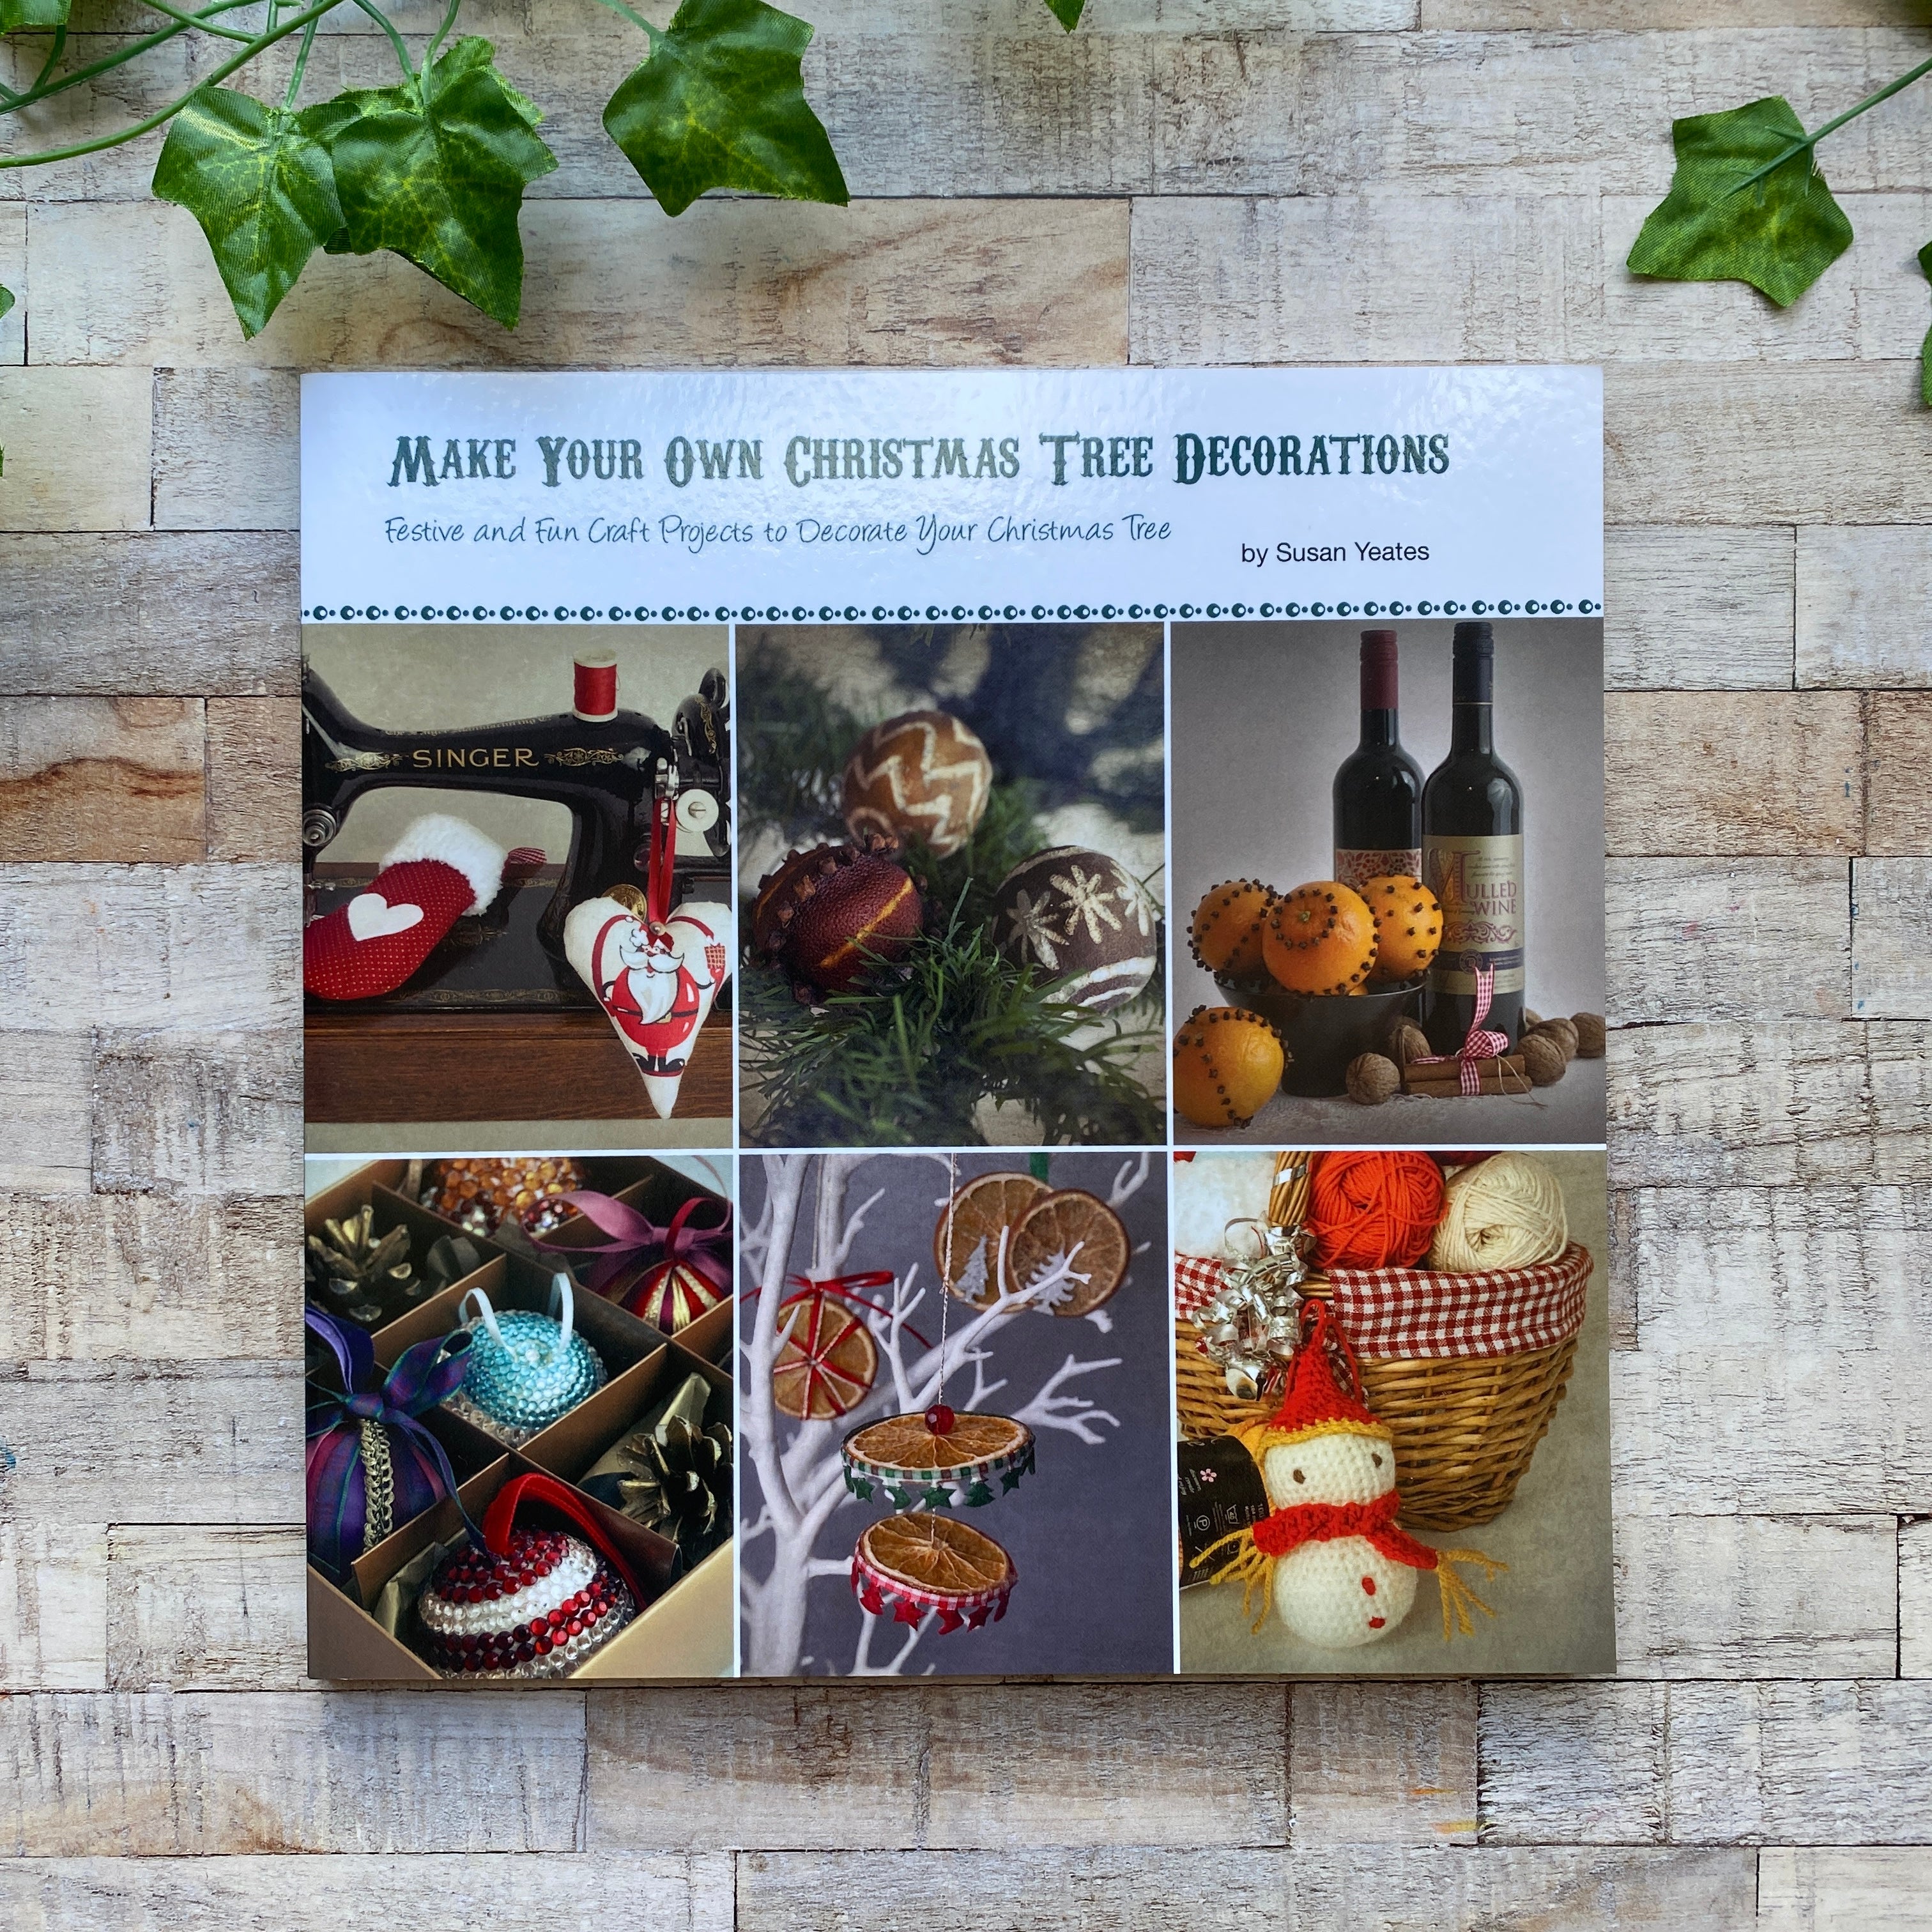 Sale - Make Your Own Christmas Tree Decorations Book